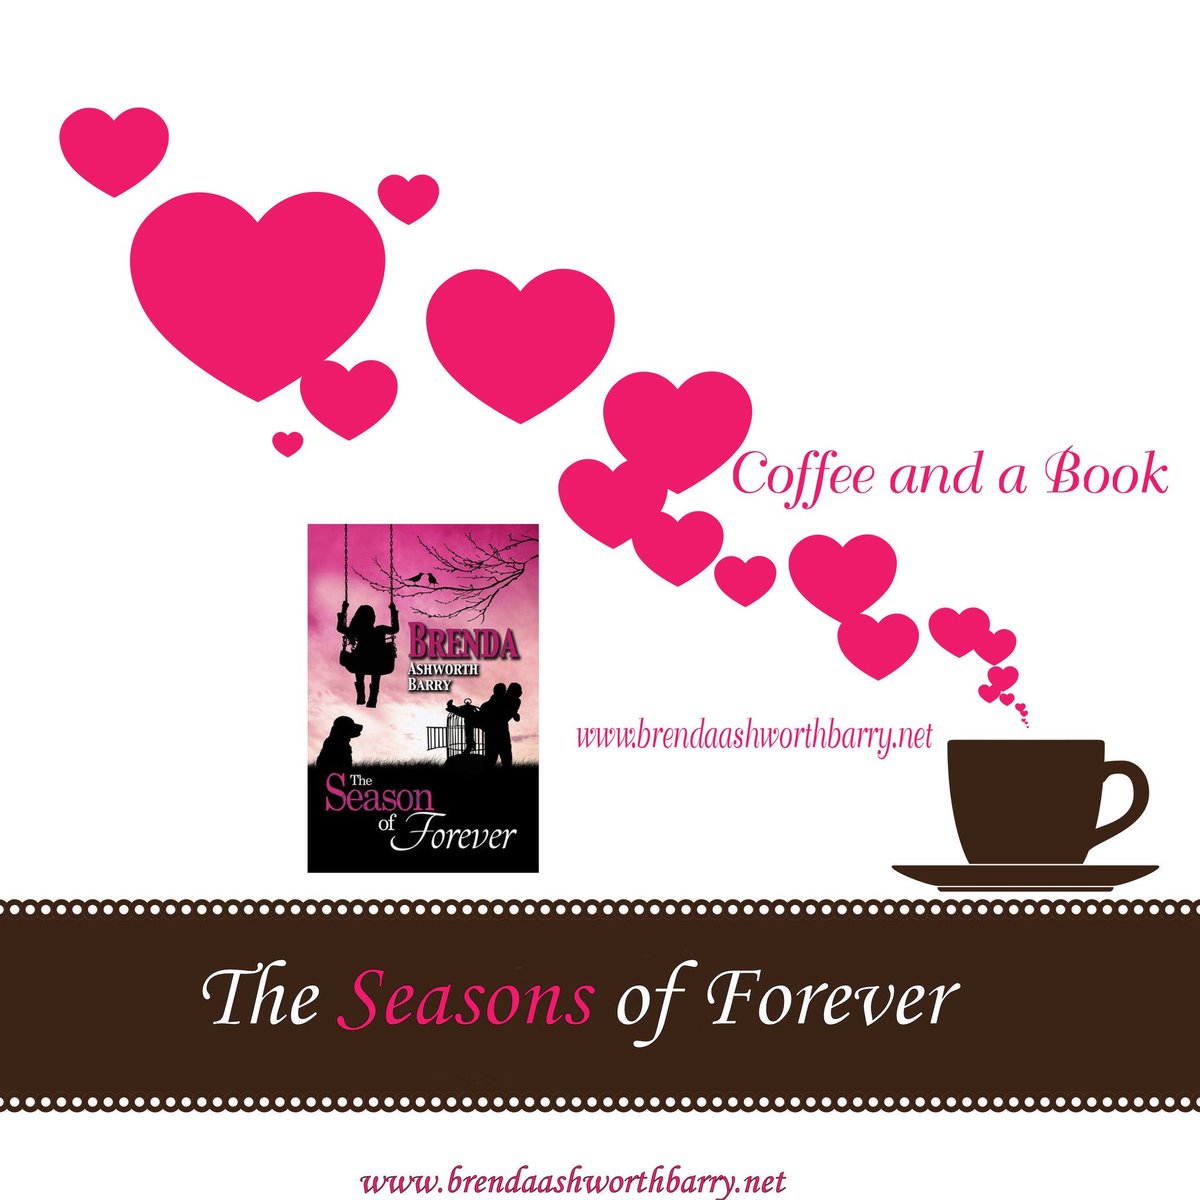 Kaylob and Beth Ann have had their fair share of triumphs and downfalls. Their love has held them together but can they ever have their season of forever? #romancewriter #bookworm 
Find out in book 6 of the Seasons Saga, another 5* read. brendaashworthbarry.net